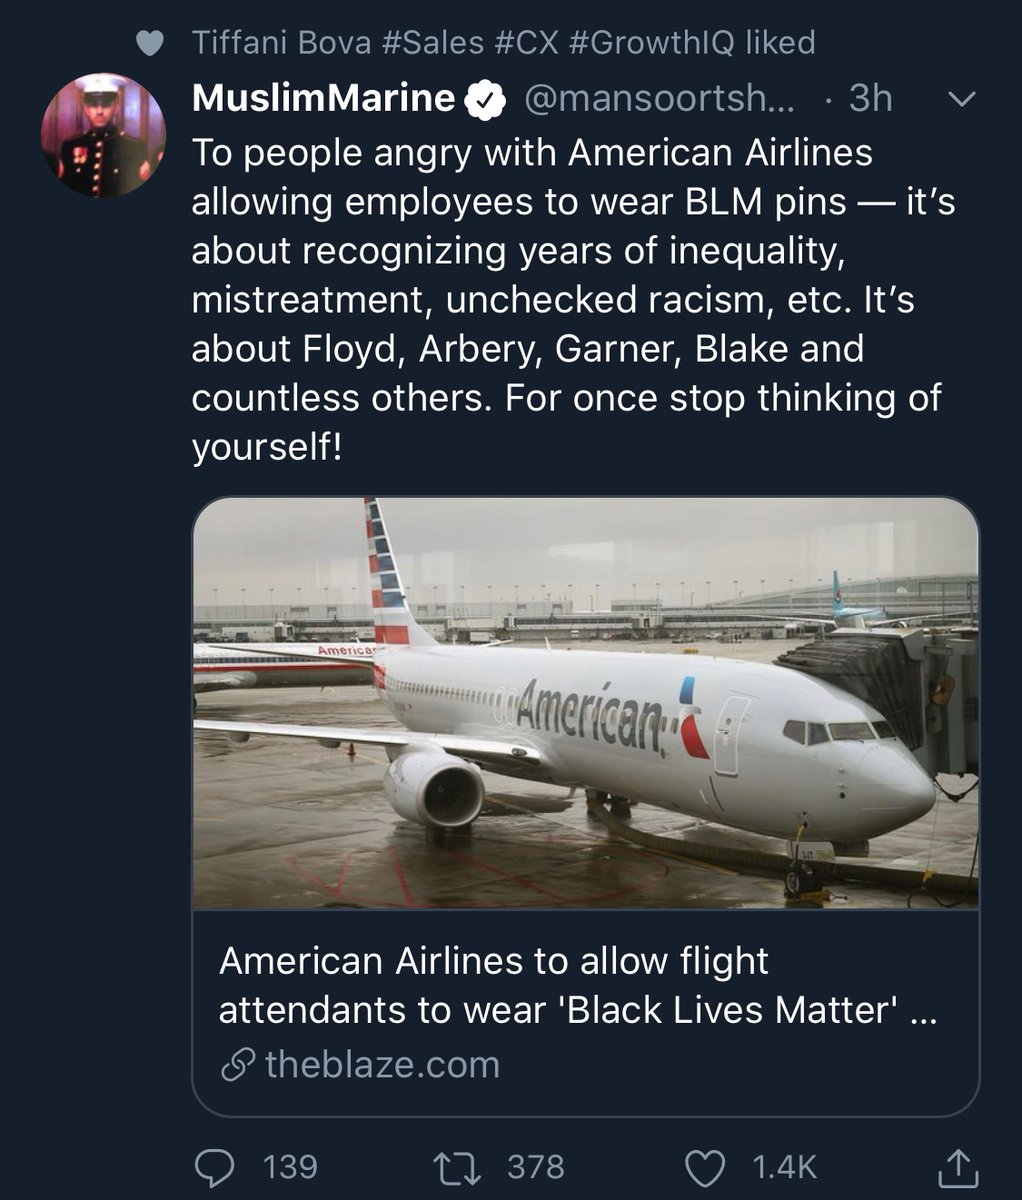 There’s a lot going on here. Salesforce executive “likes” a post by a subversive POG camelfucker about American Airlines adding BLM swag to their uniform.